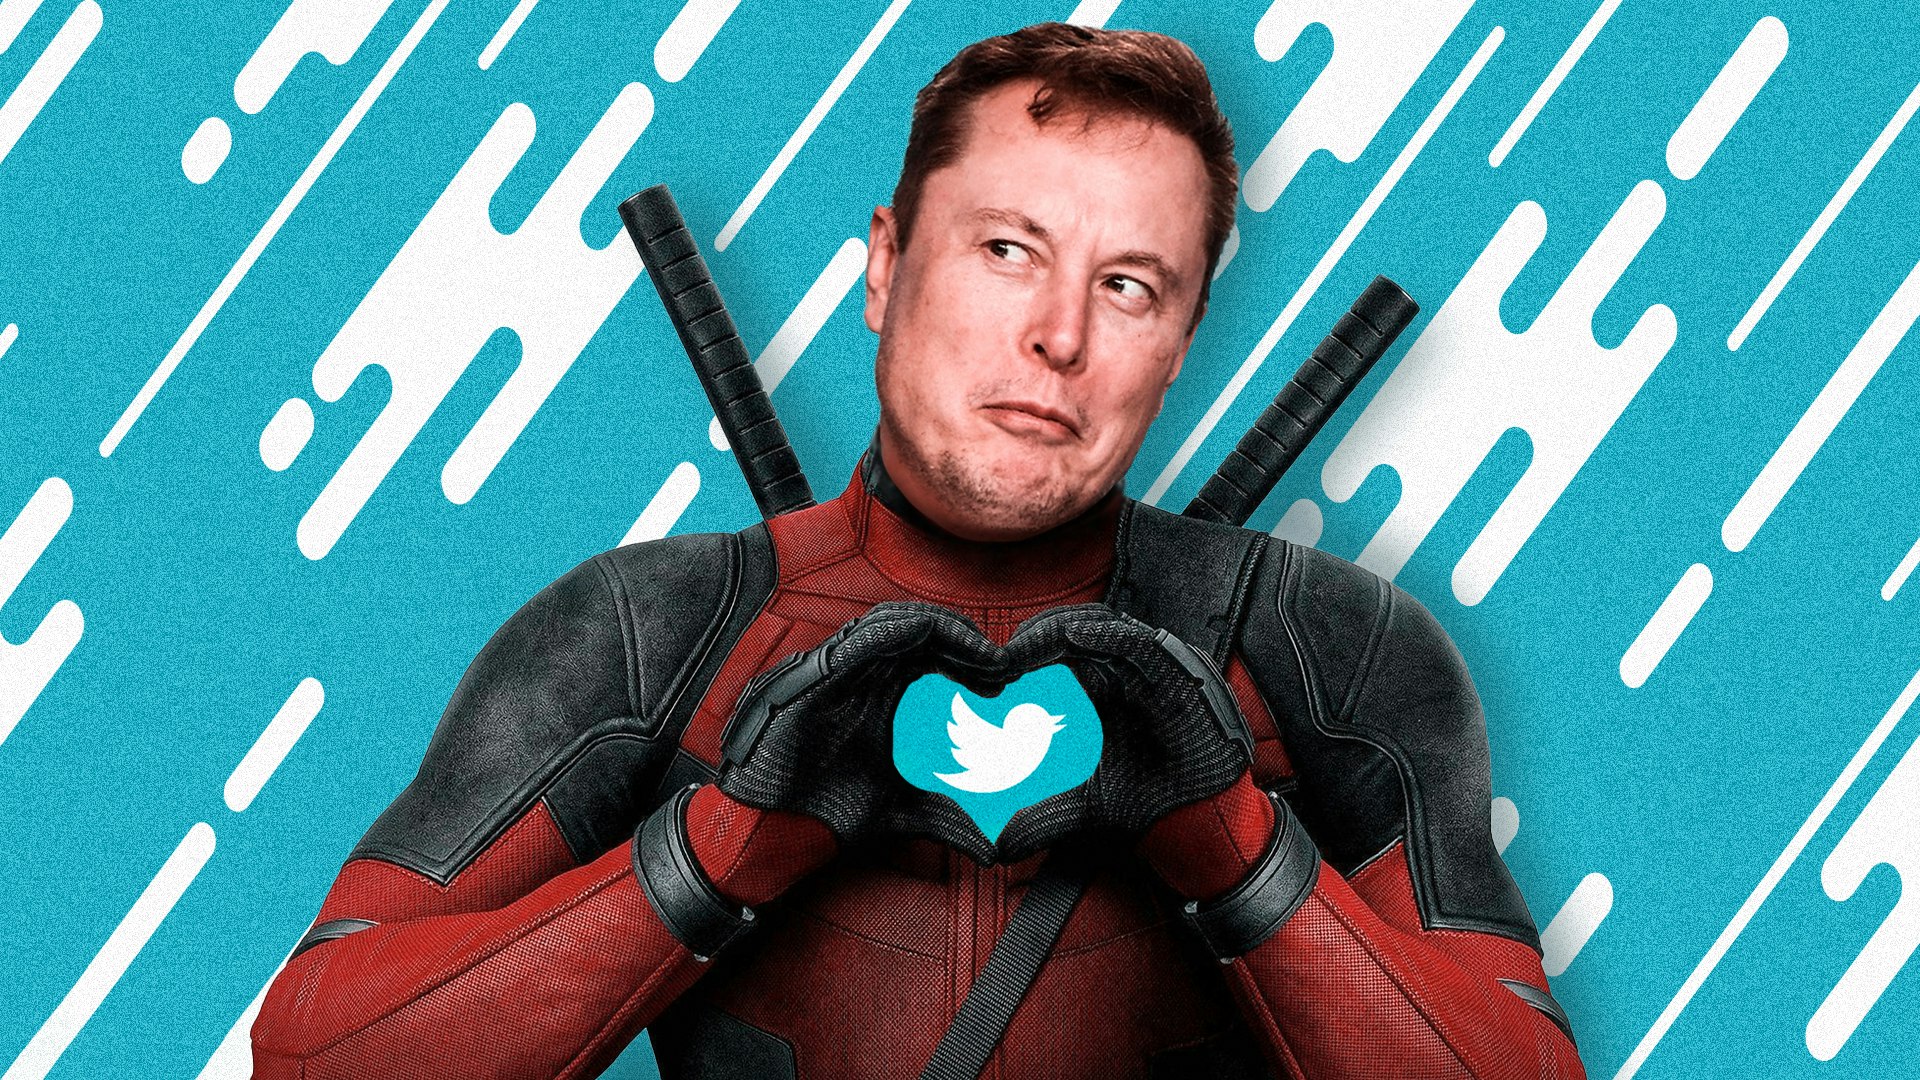 Ep. 938 - Terrified Leftists Cry Out In Despair As Elon Musk Takes Over Twitter